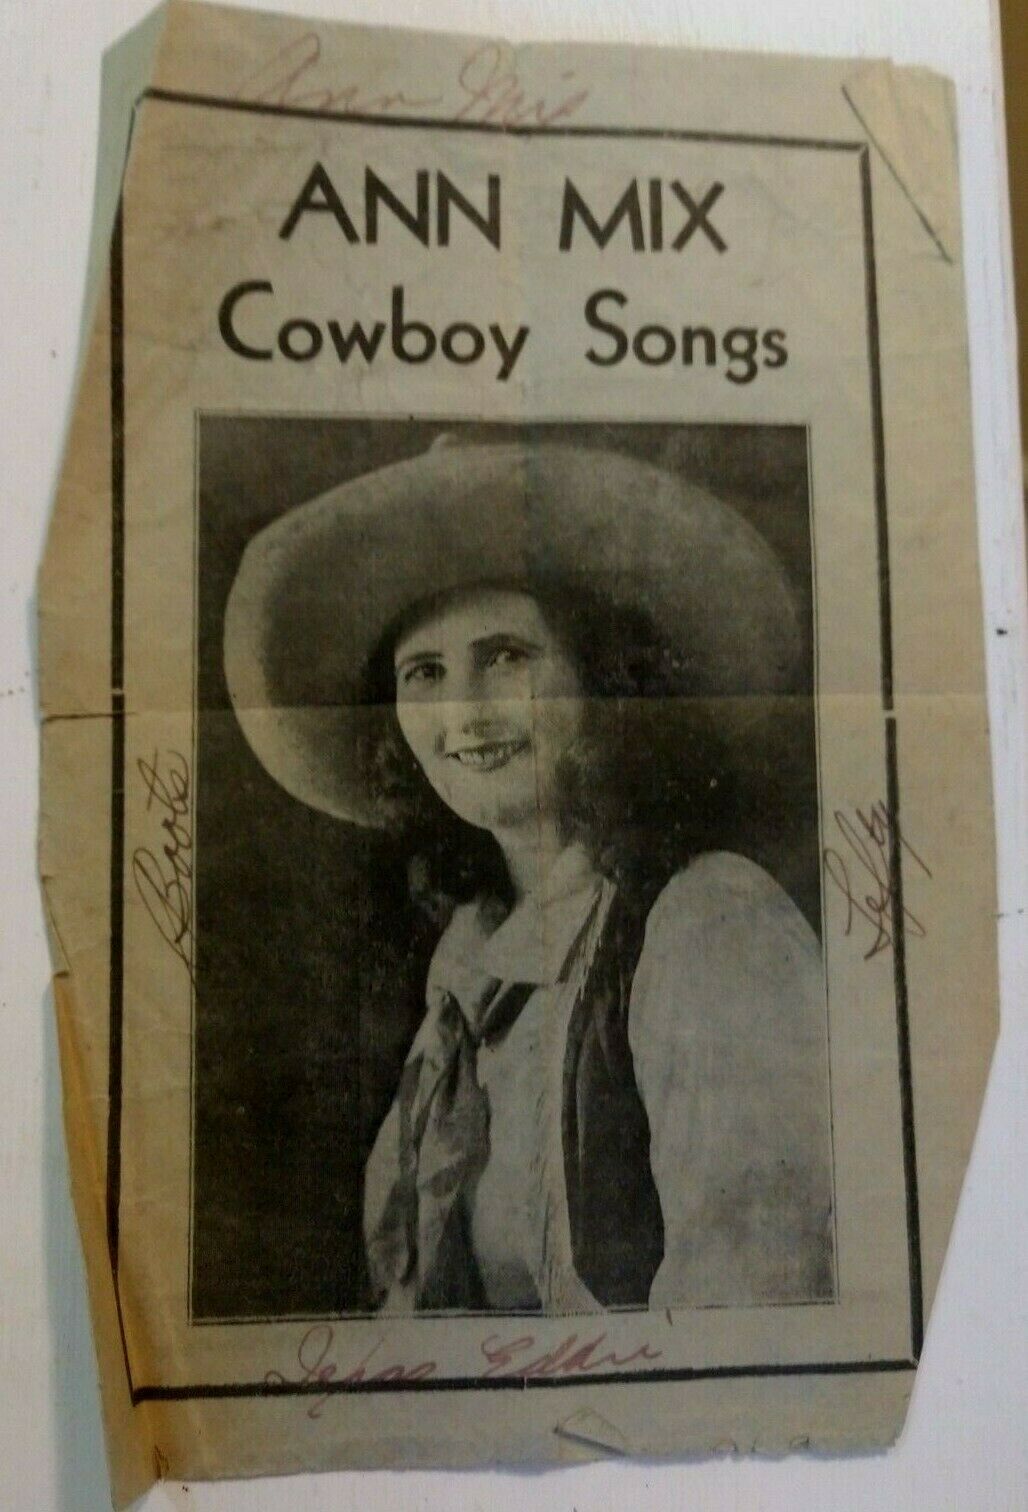 Ann Mix - Famous Cowgirl 1930s Cowboy Songs / Whips Rope & Gun Tricks / SIGNED